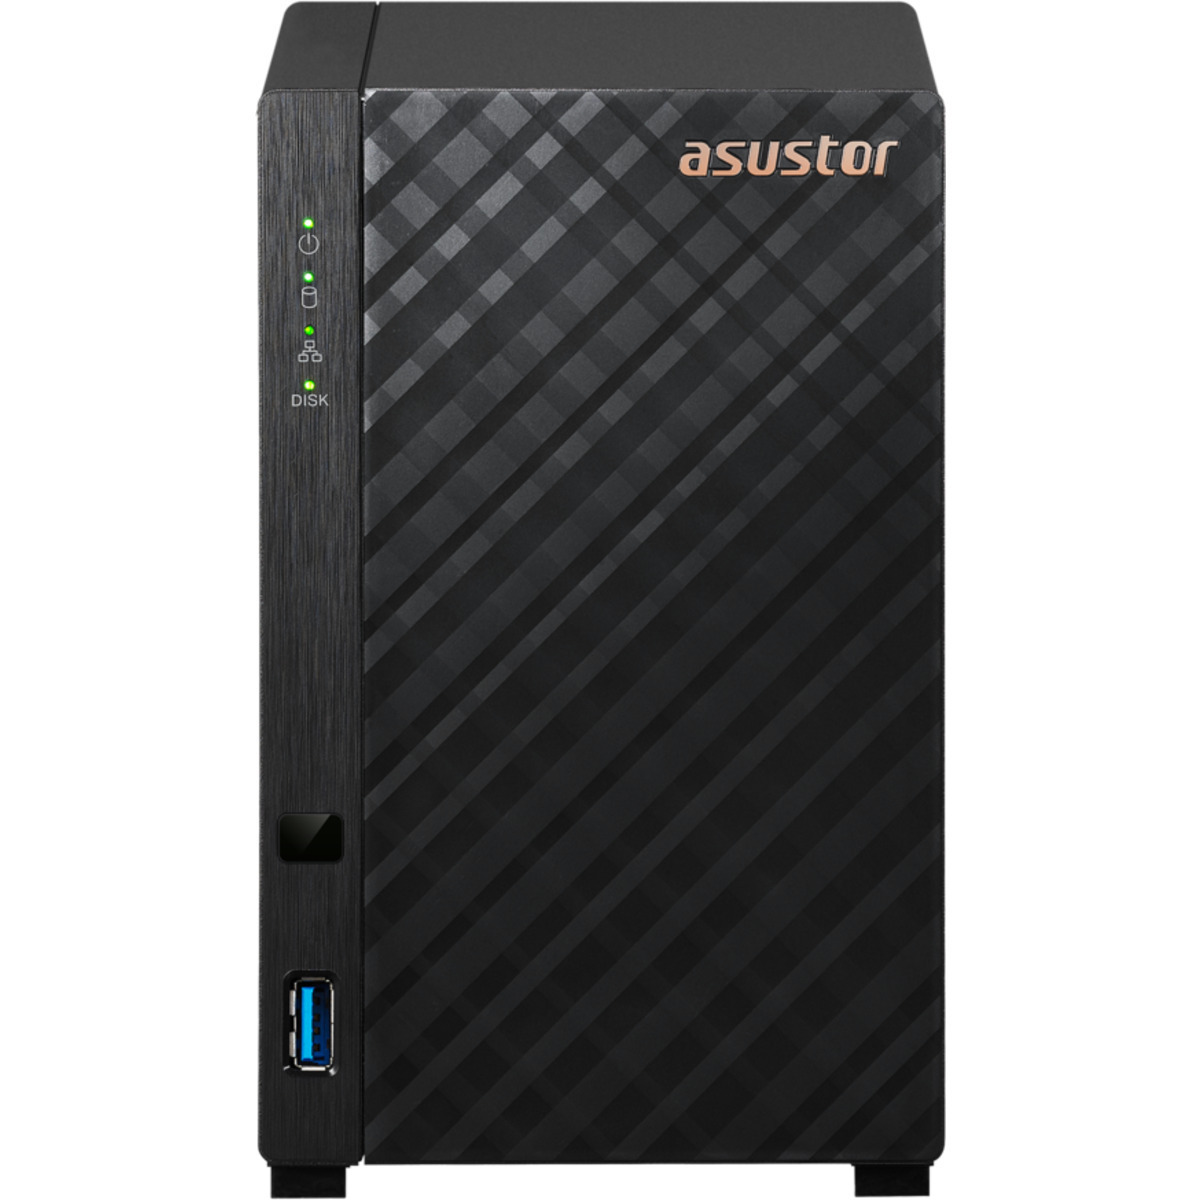 ASUSTOR DRIVESTOR 2 Lite AS1102TL 16tb 2-Bay Desktop Personal / Basic Home / Small Office NAS - Network Attached Storage Device 2x8tb Western Digital Red Plus WD80EFPX 3.5 7200rpm SATA 6Gb/s HDD NAS Class Drives Installed - Burn-In Tested DRIVESTOR 2 Lite AS1102TL